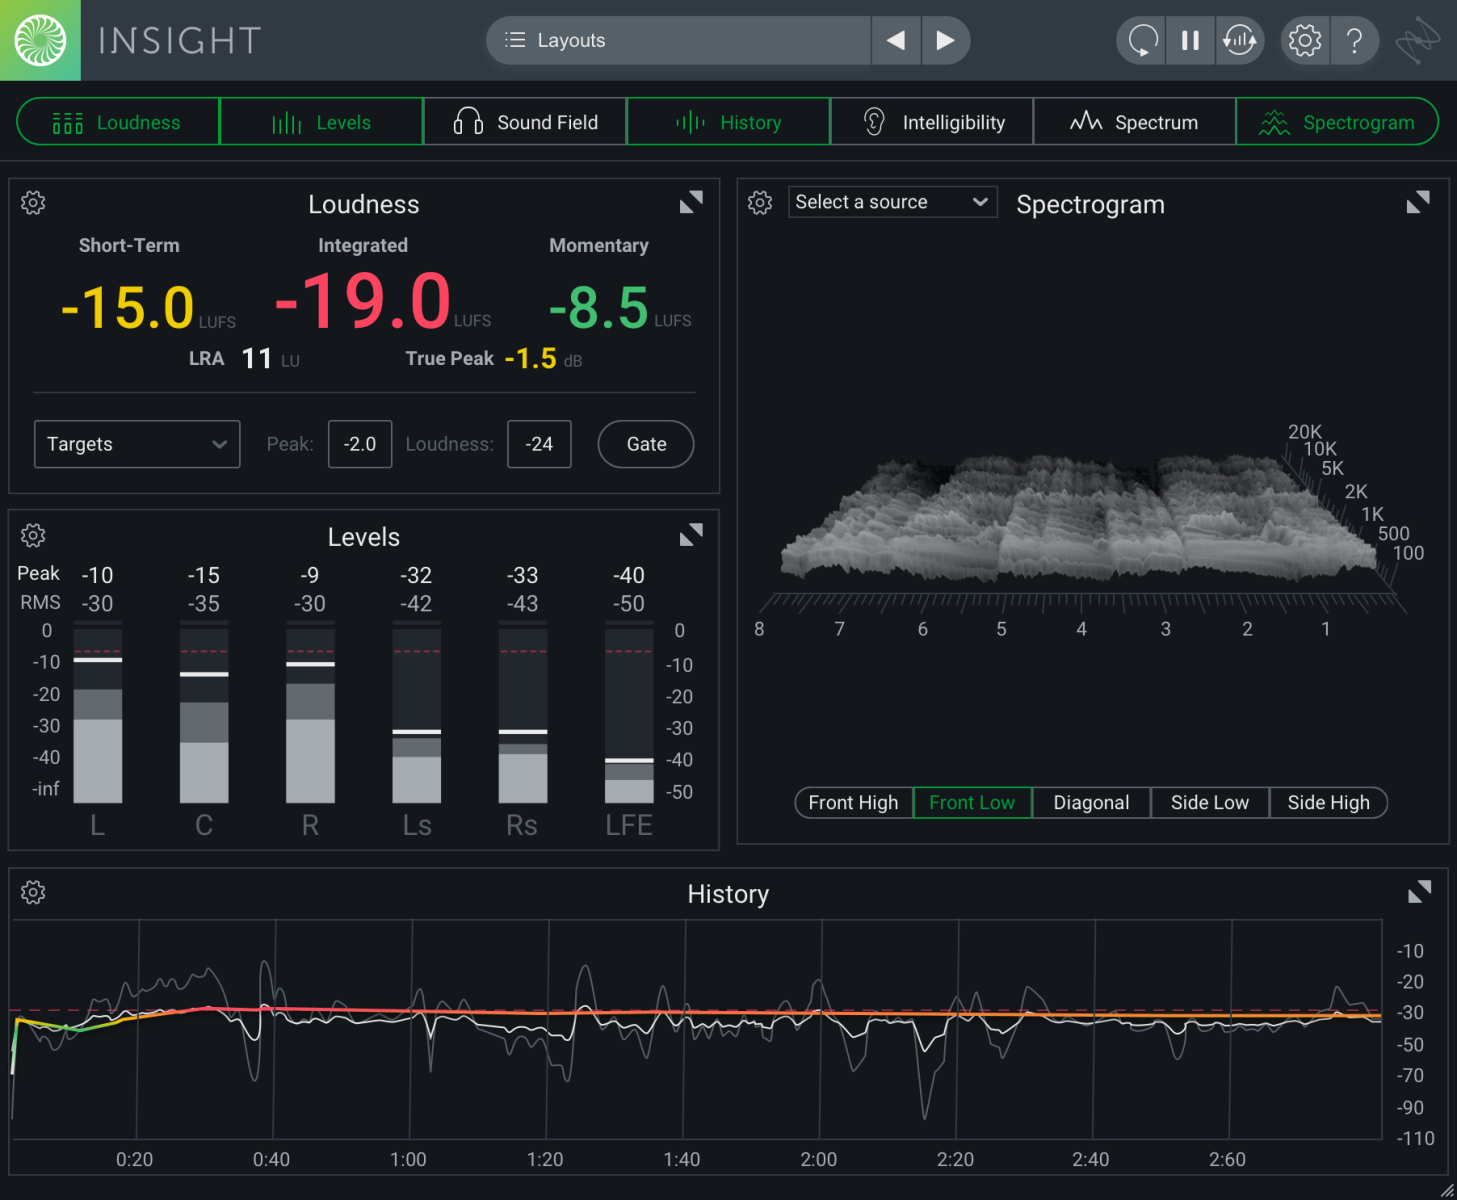 izotope insight presets gone